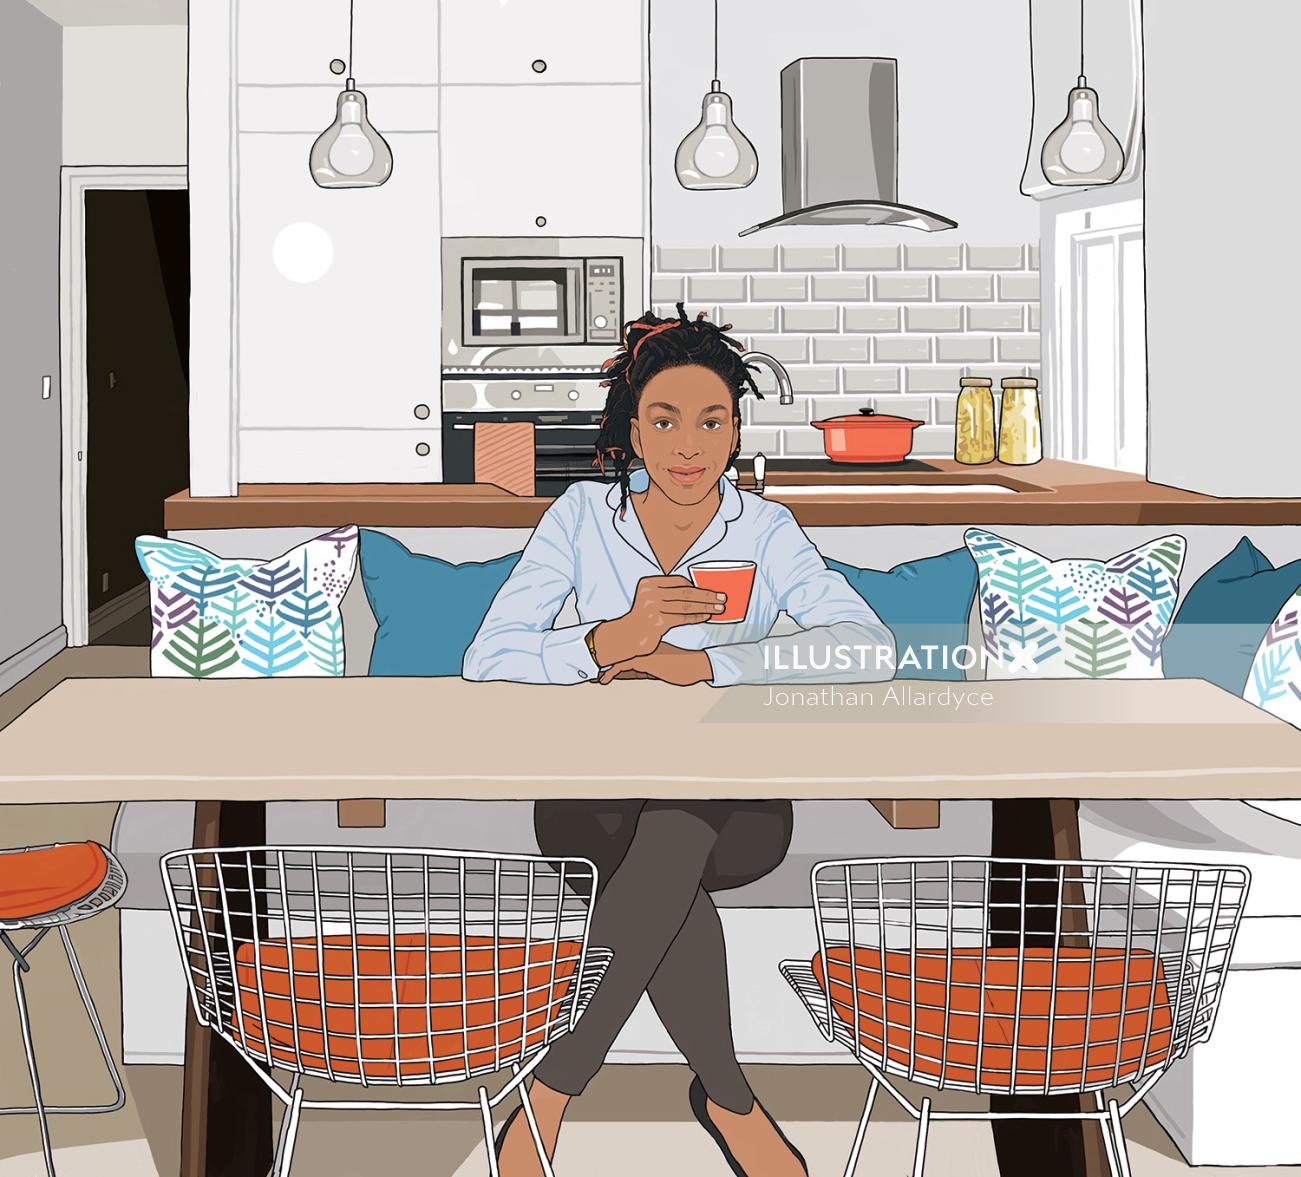 Computer Generated Animation of Girl sitting in kitchen